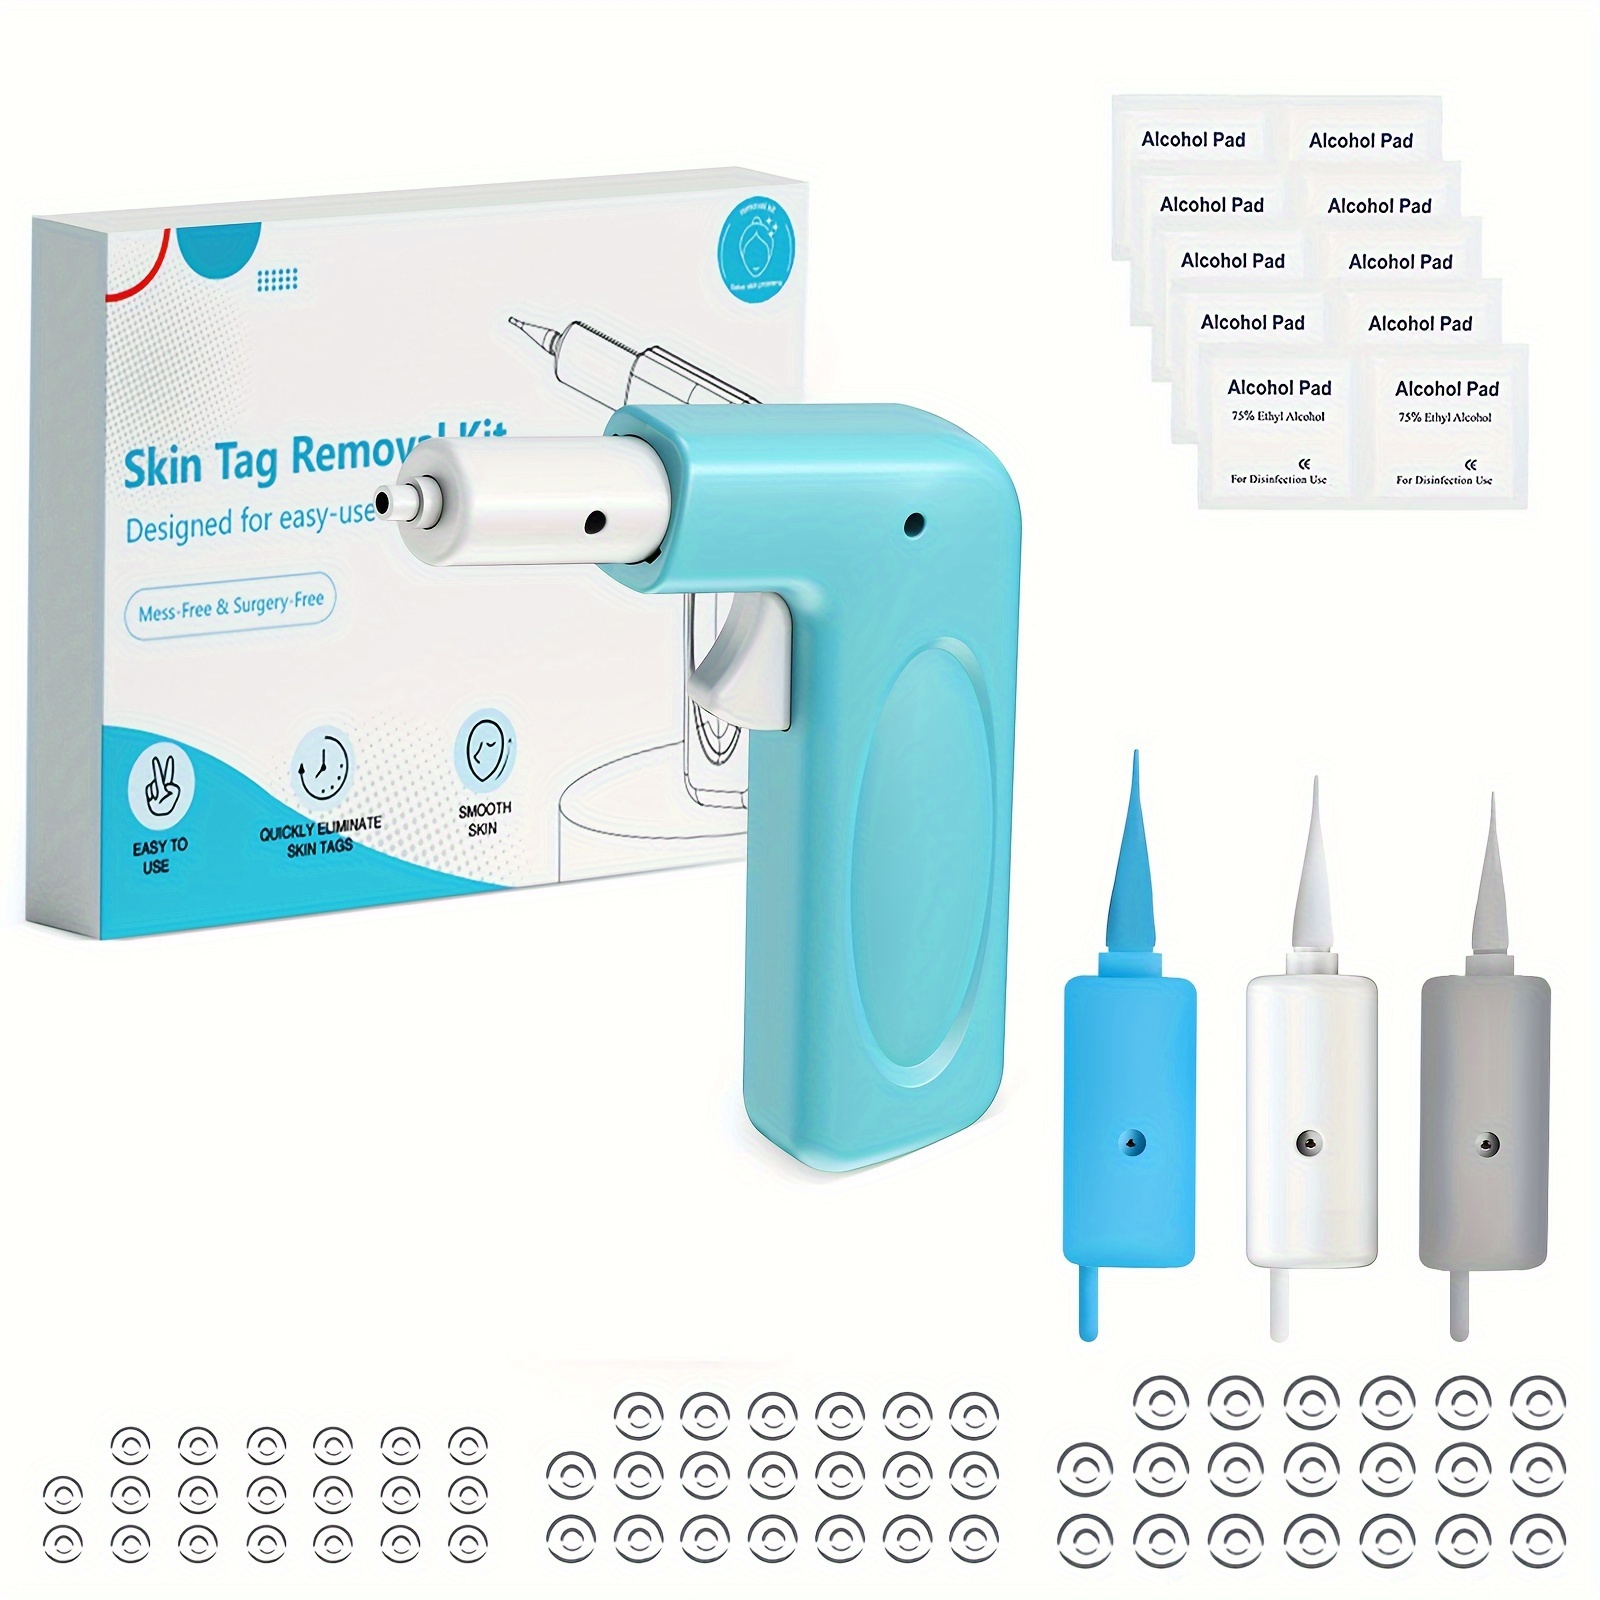 Micro Skin Tag Remover Tool Kit Rubber Bands for Wart Acne Skin Tags Removal  Kit